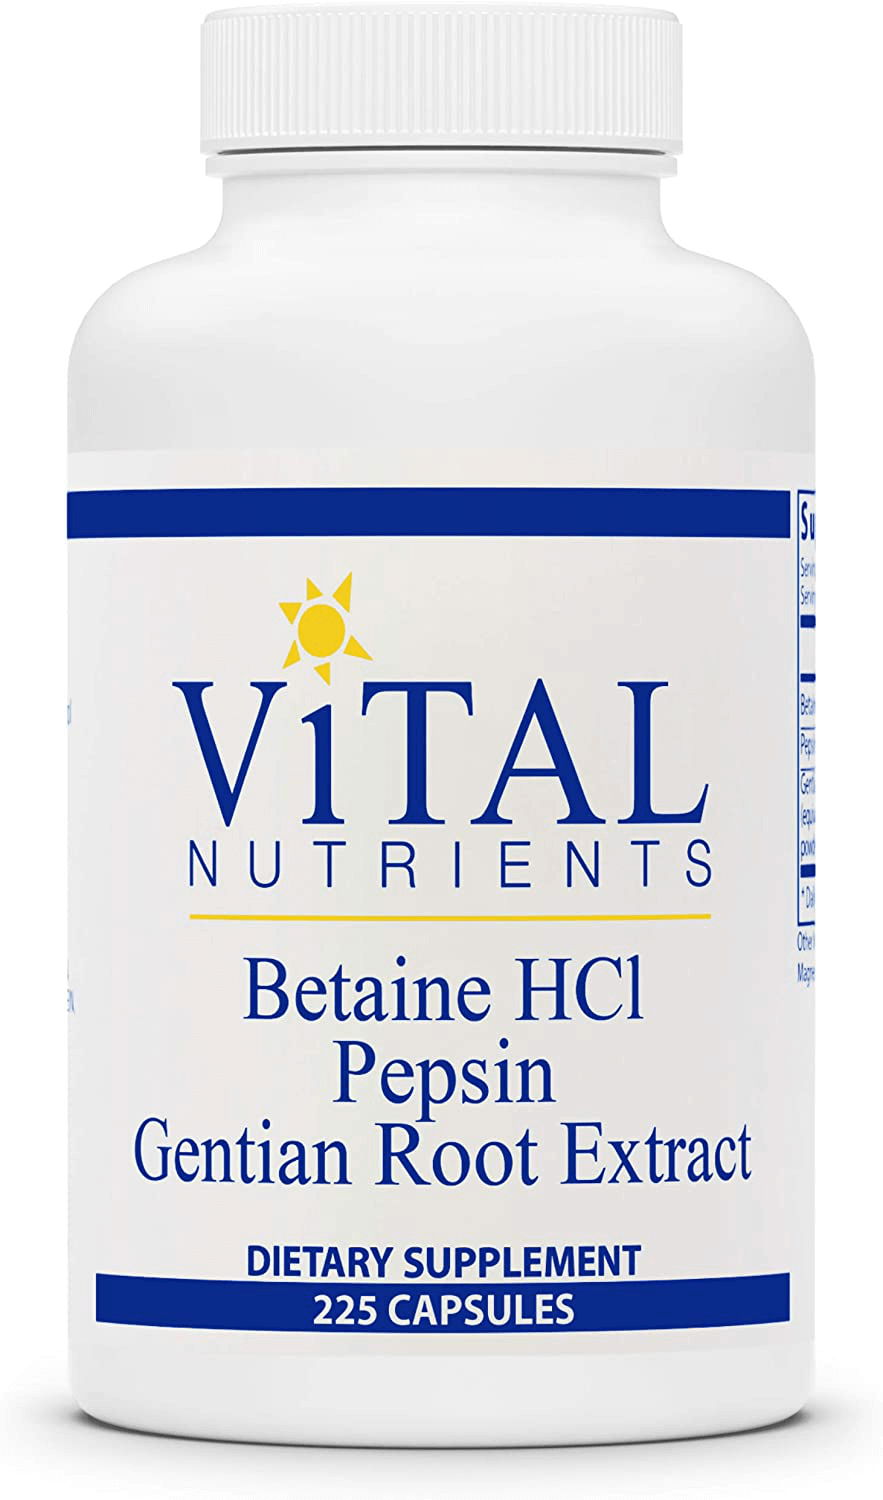 Vital Nutrients - Betaine HCL Pepsin and Gentian Root Extract - Powerful Digestive Support for the Stomach - Gluten Free - 225 Capsules per Bottle - vitamenstore.com